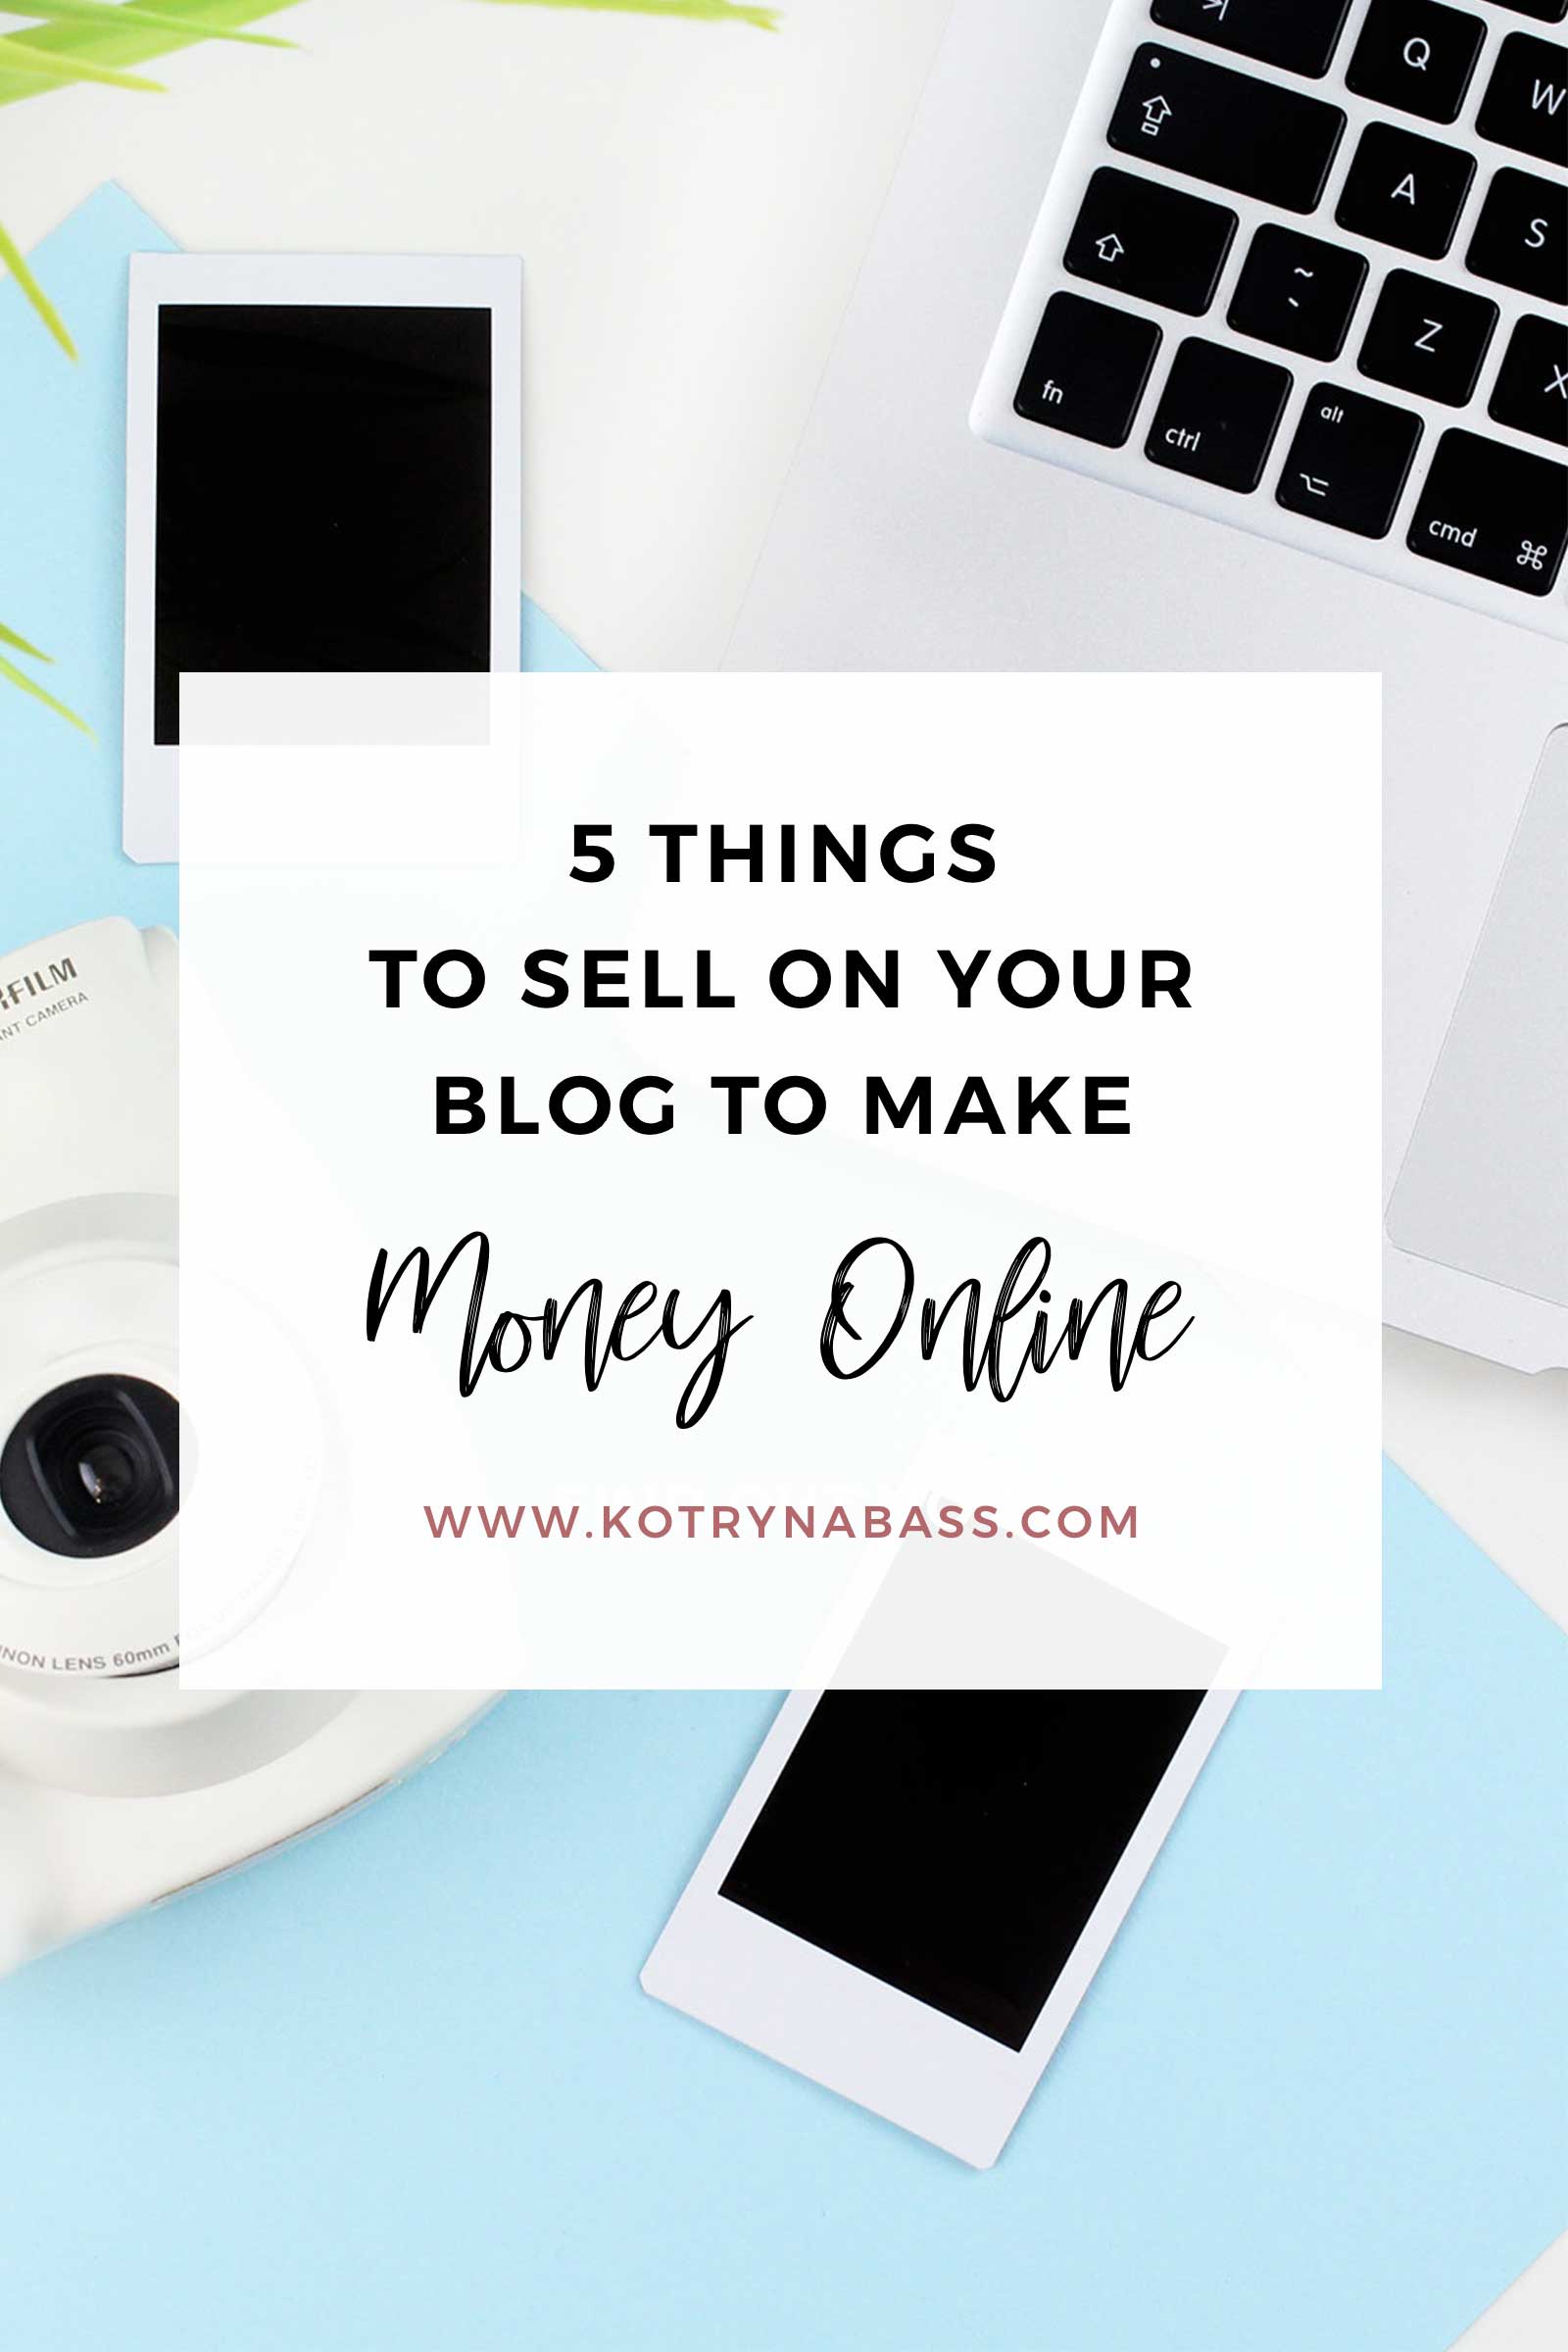 Making money from your blog is not only about using affiliate links or landing sponsorships. One of the most profitable ways to start earning money online can be done by advertising your own products. Wondering what you can create & offer to your readers? Let me share some ideas with you all!